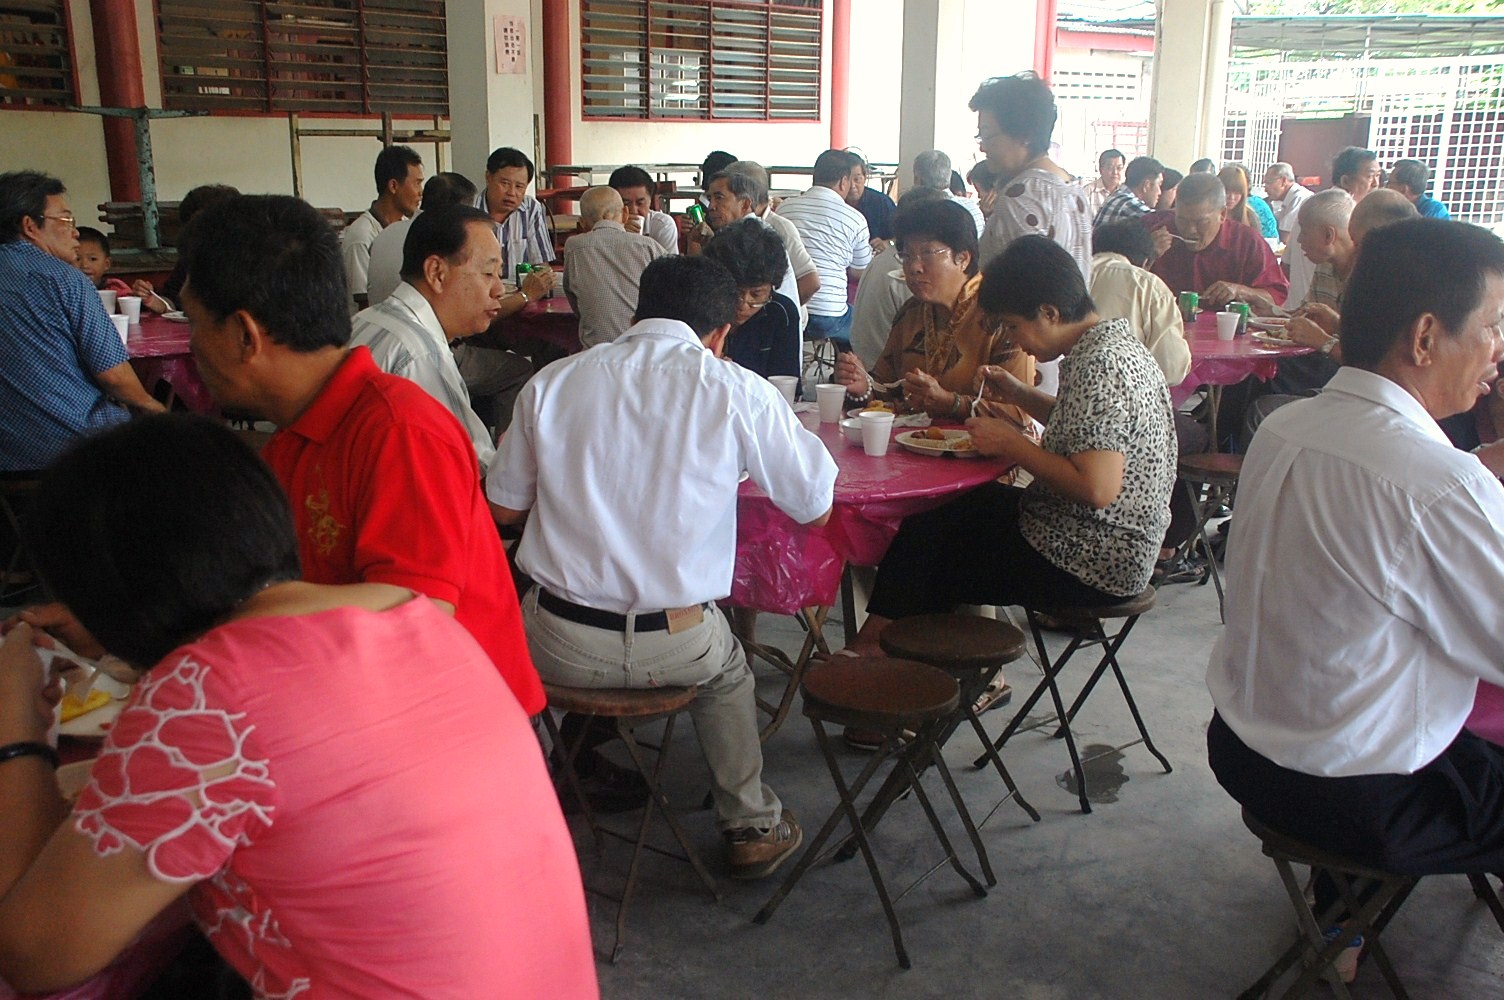 Temple officials of Wong Loo Sen See Temples throughout Malaysia and Singapore gathered for a "reunion" buffet lunch in their annual get-together to strengthen fellowship and fraternity.